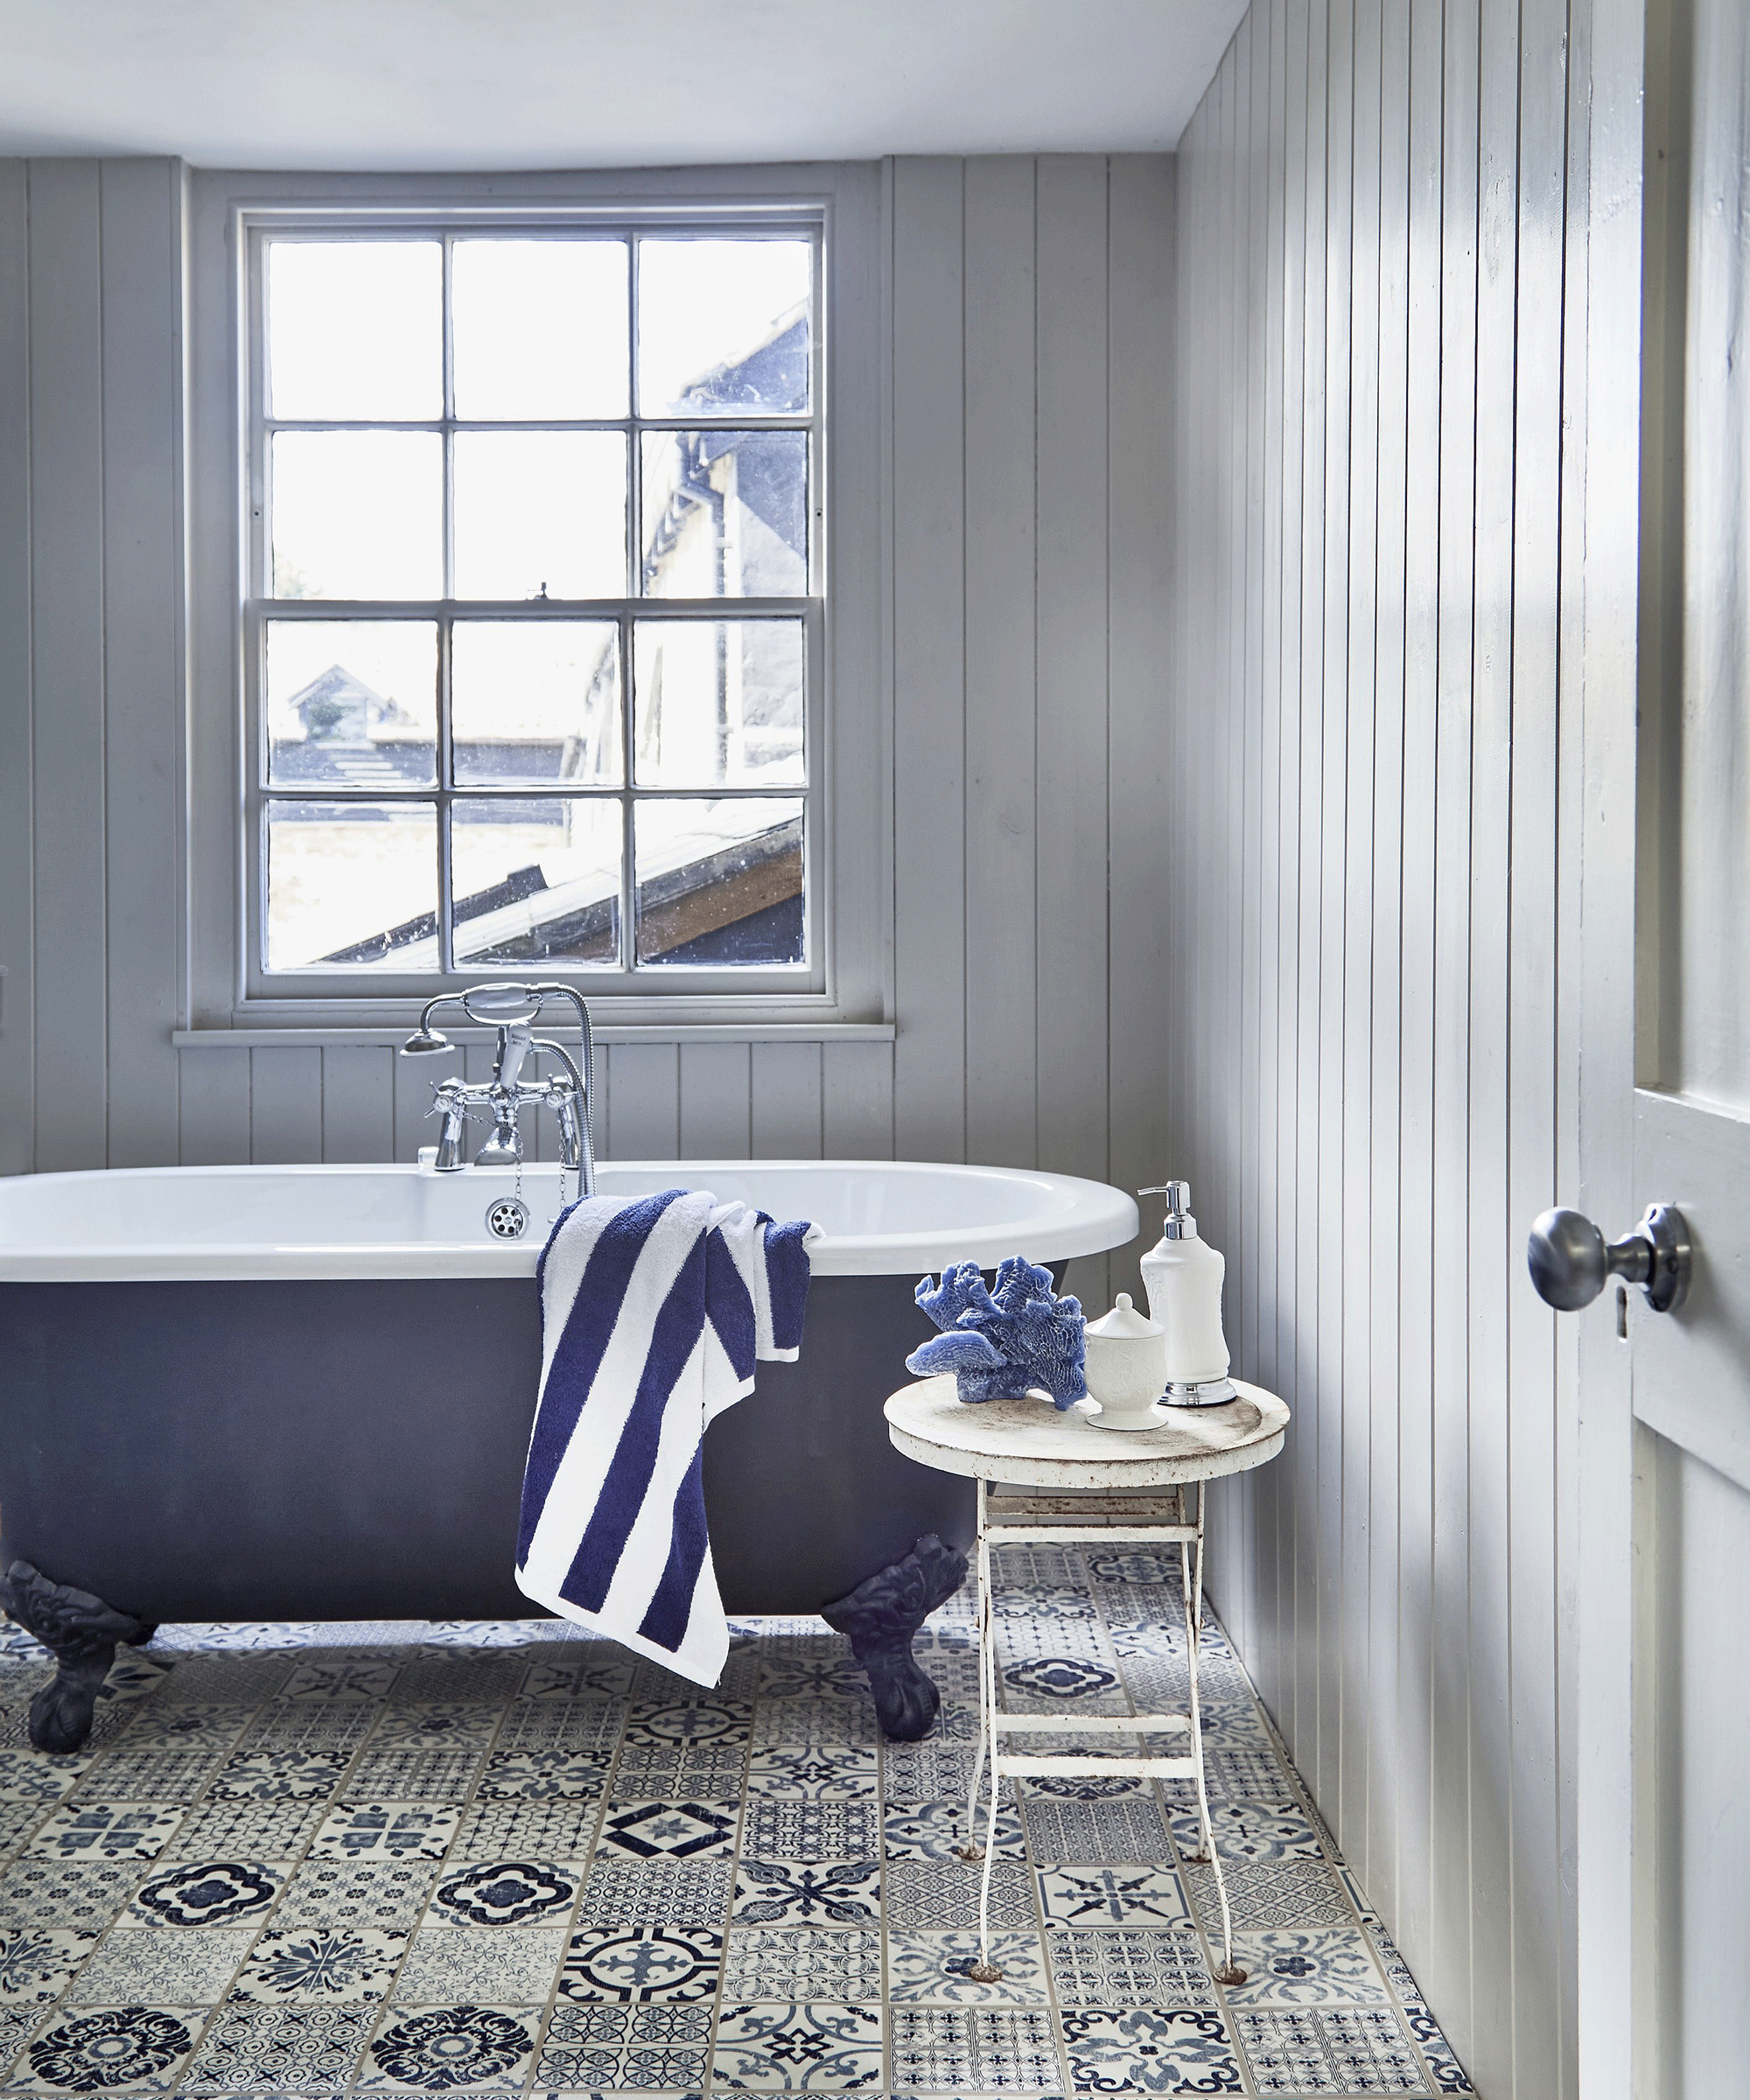 Blue and white bathroom with mosaic style luxury vinyl tiles and freestanding blue bath tub